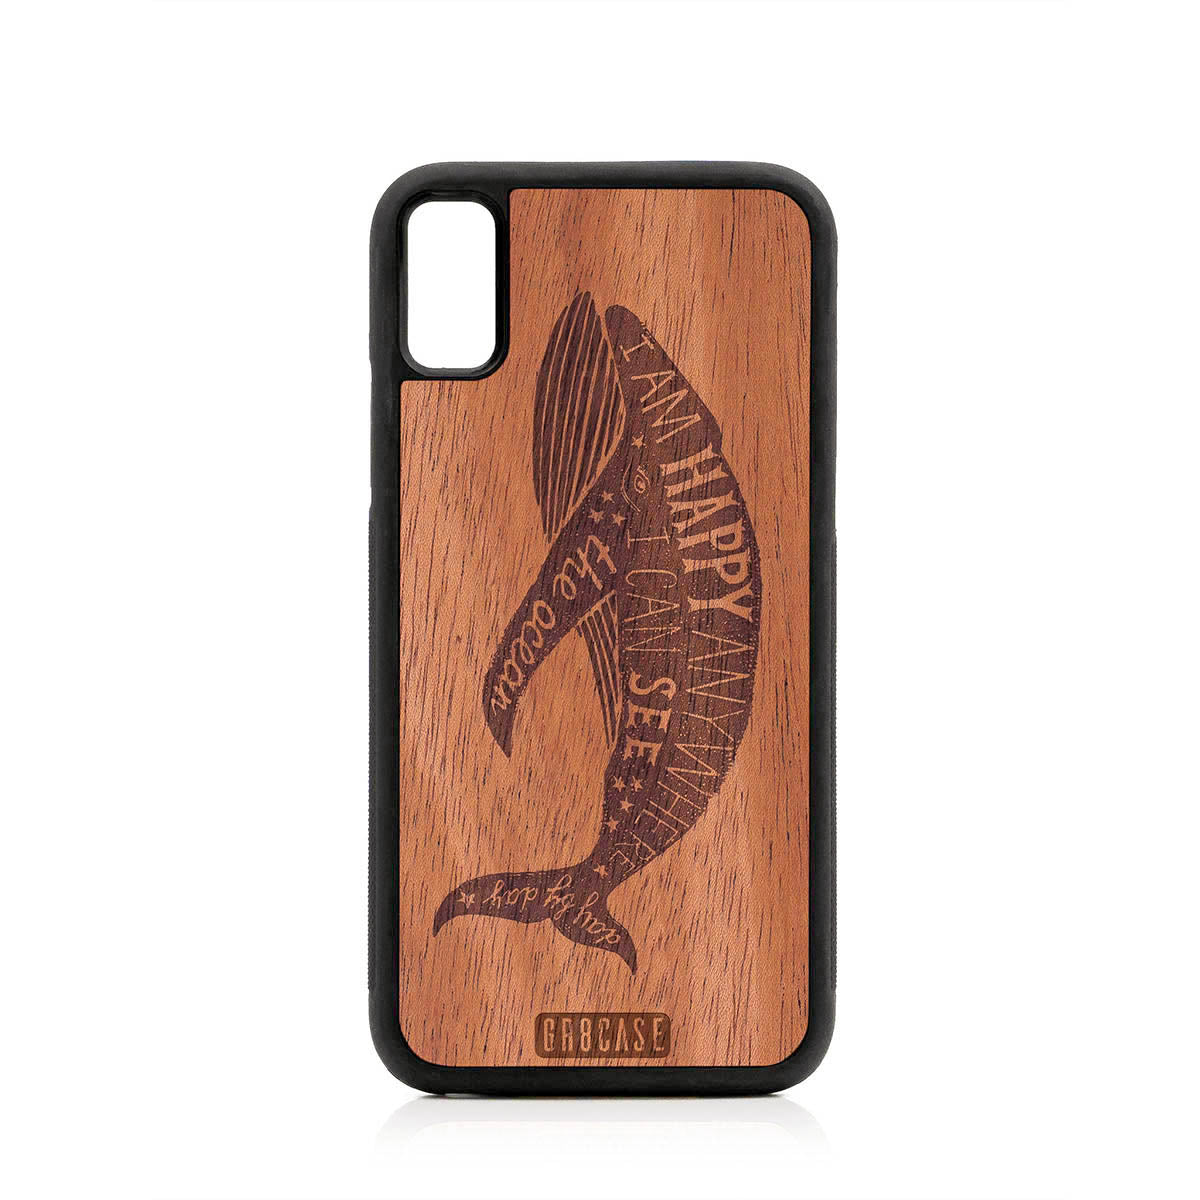 I'm Happy Anywhere I Can See The Ocean (Whale) Design Wood Case For iPhone XR